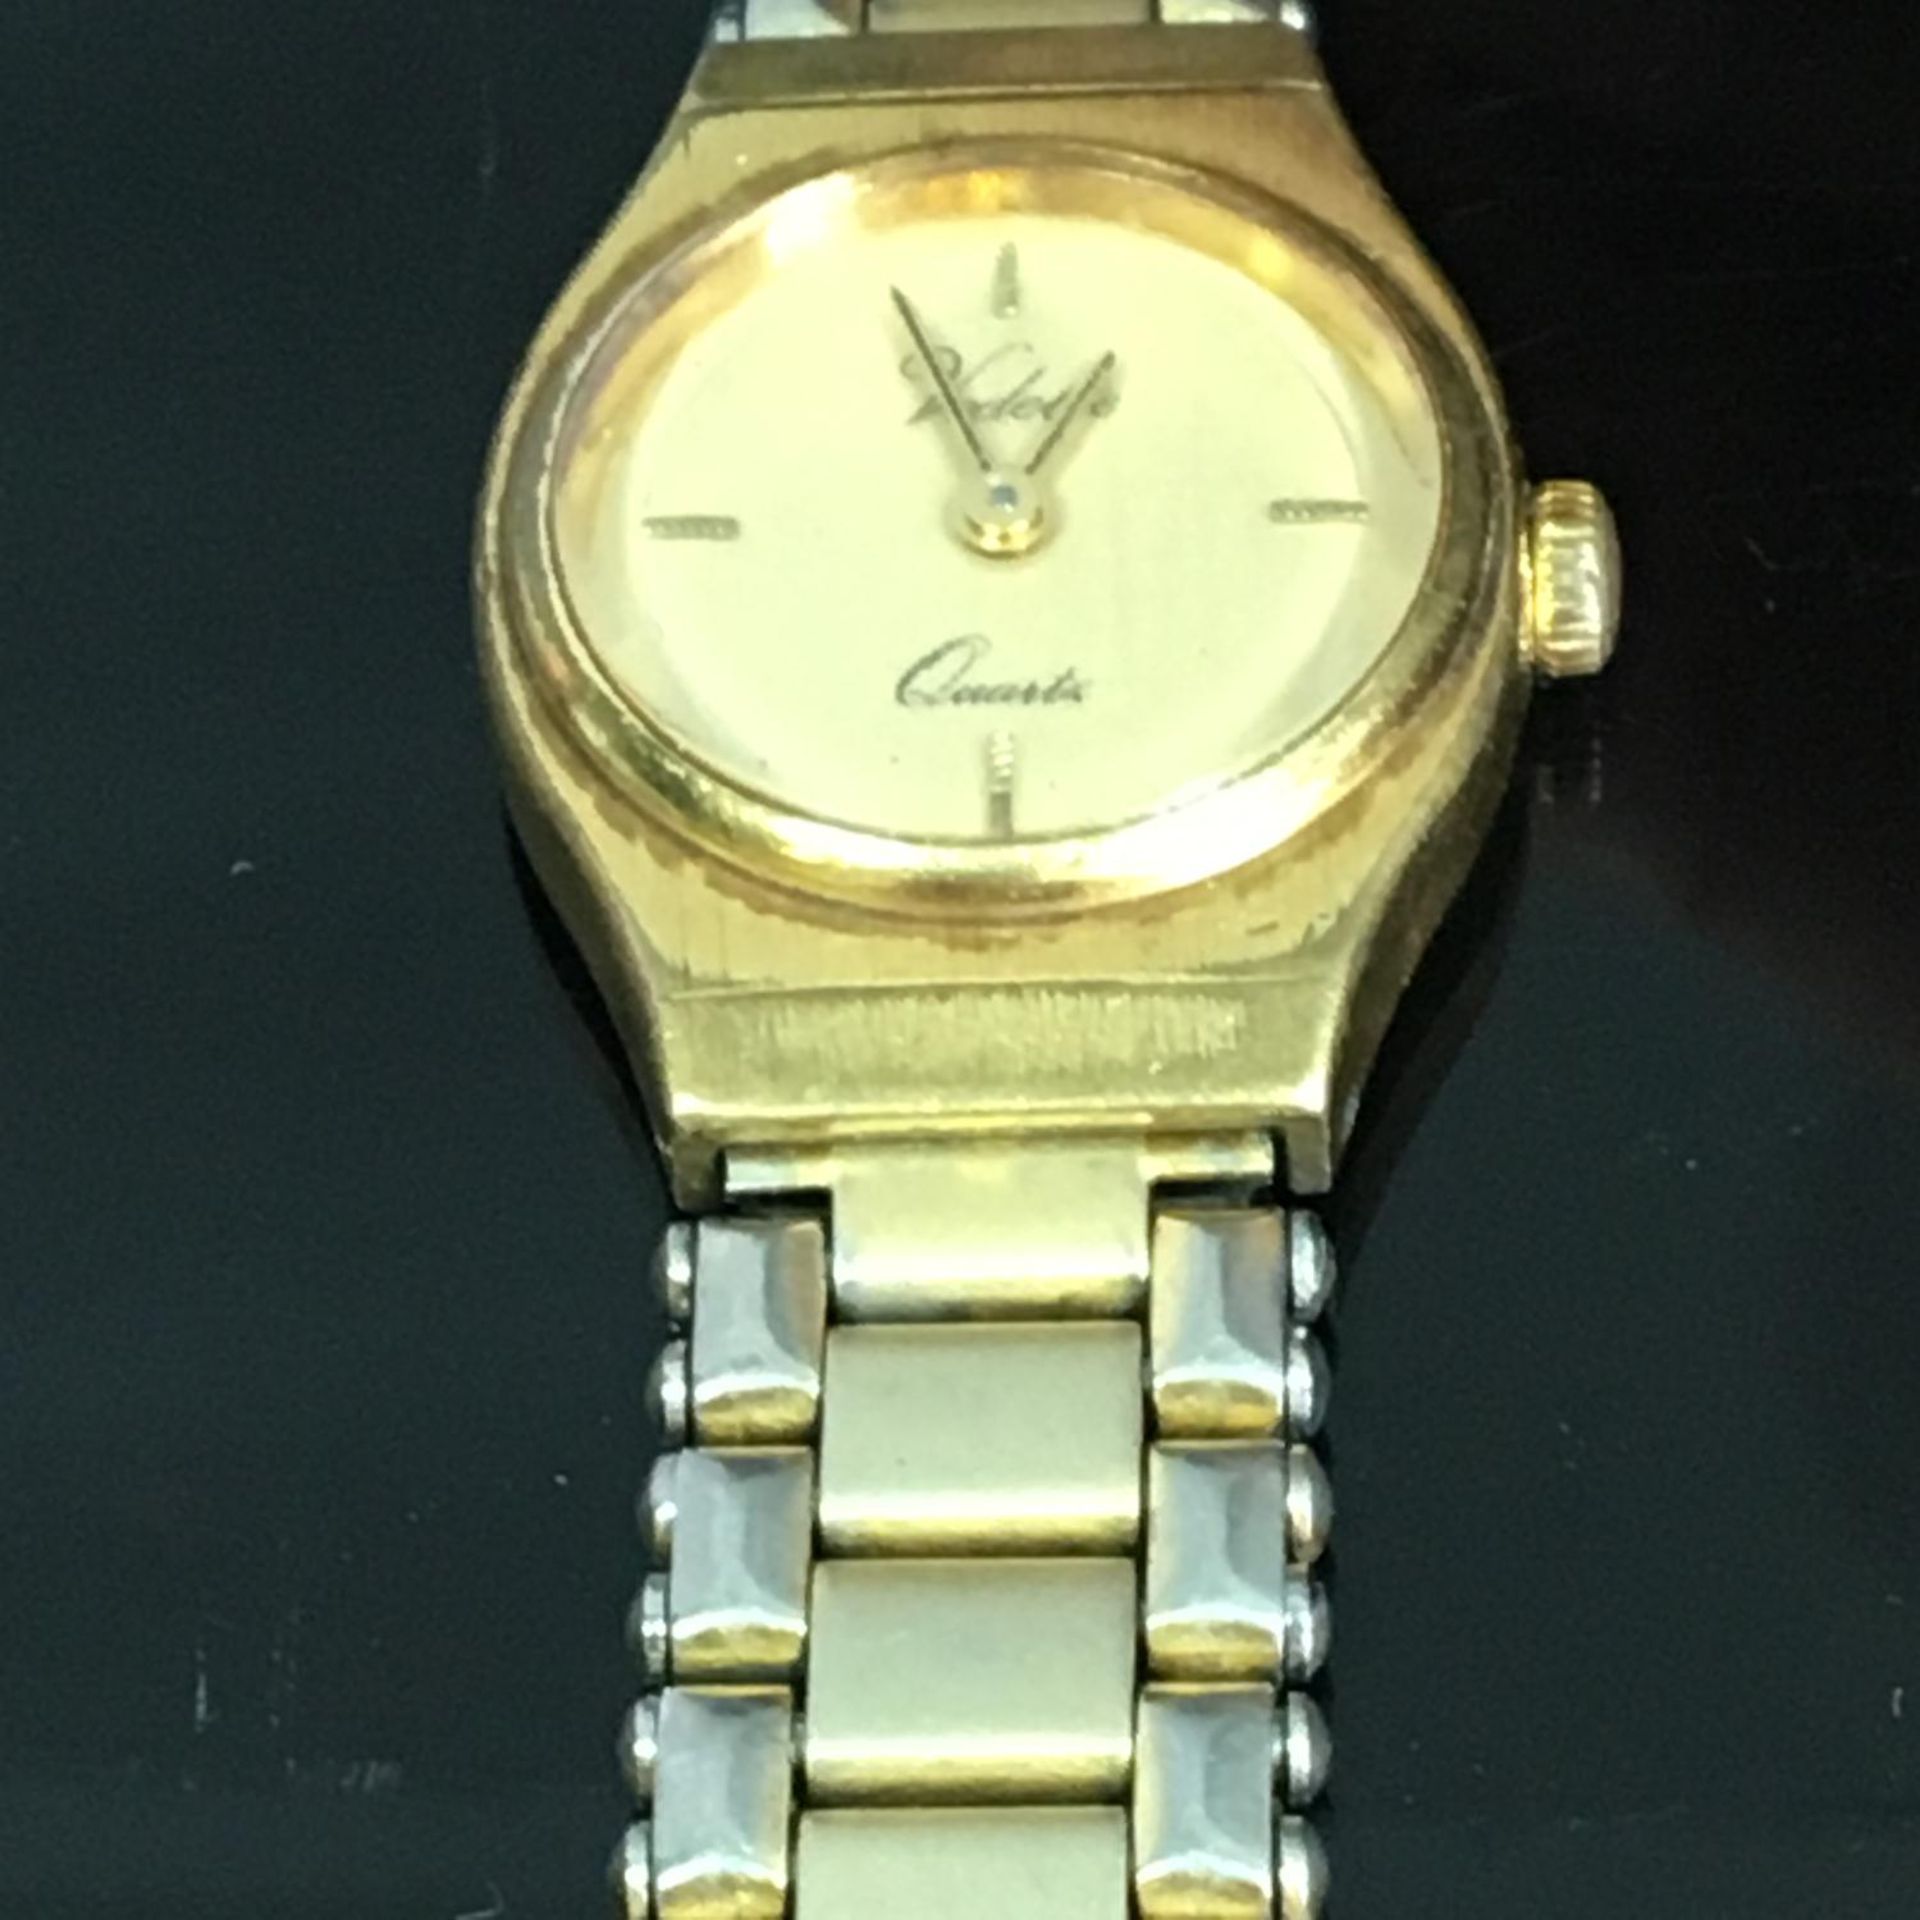 Vintage Vedette ladies watch. Swiss made. Battery powered, runs but needs attention. The movement - Image 3 of 3